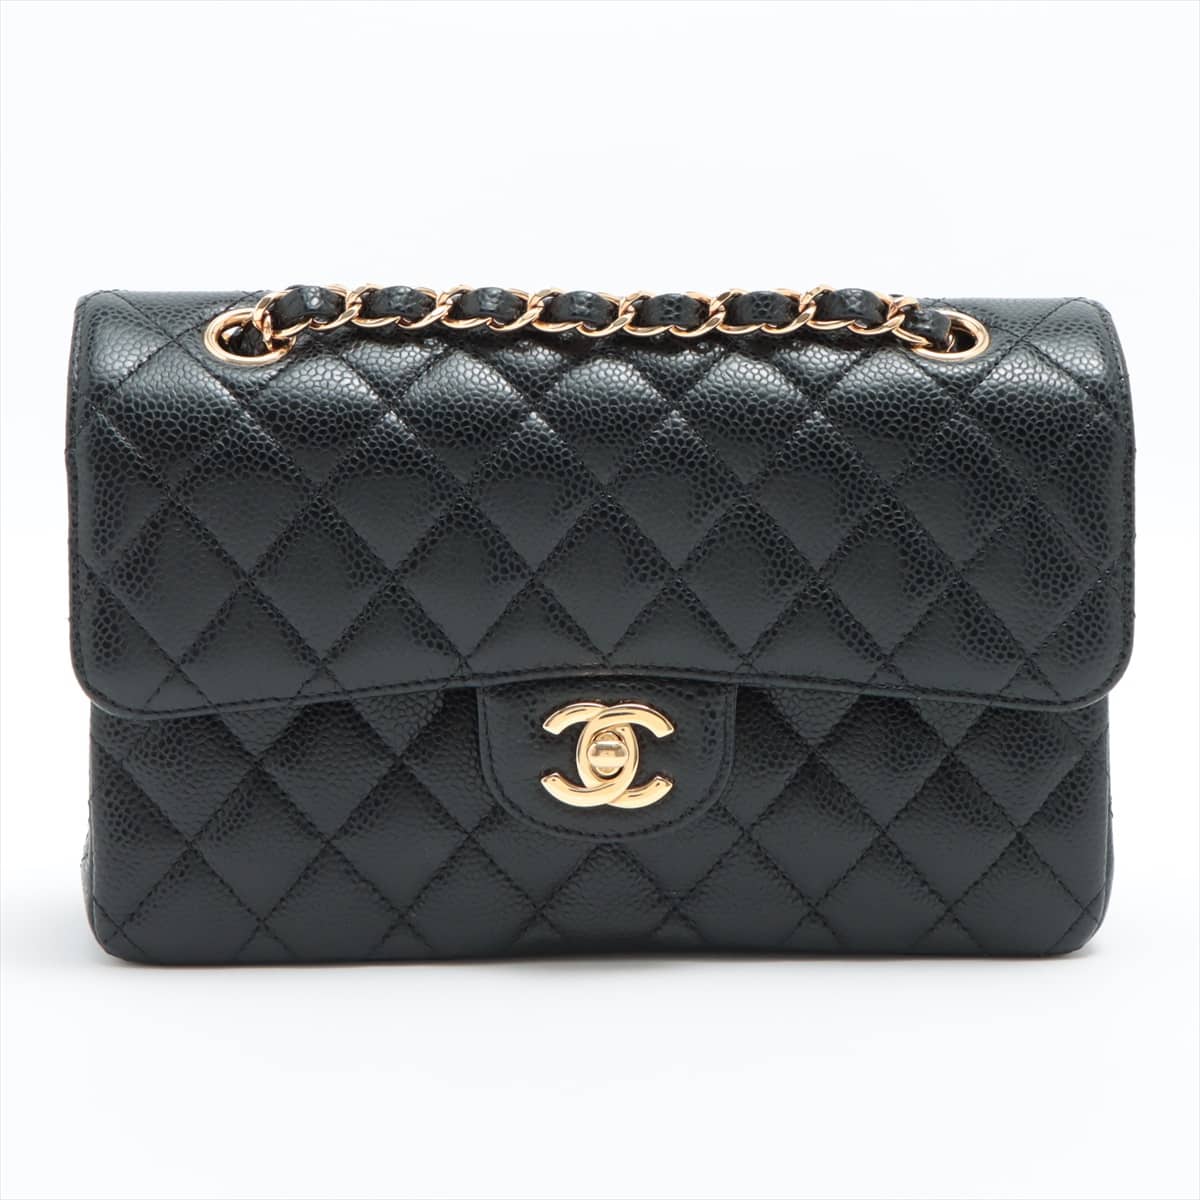 Chanel Matelasse Caviarskin Double flap Double chain bag Black Gold Metal fittings There is an IC chip